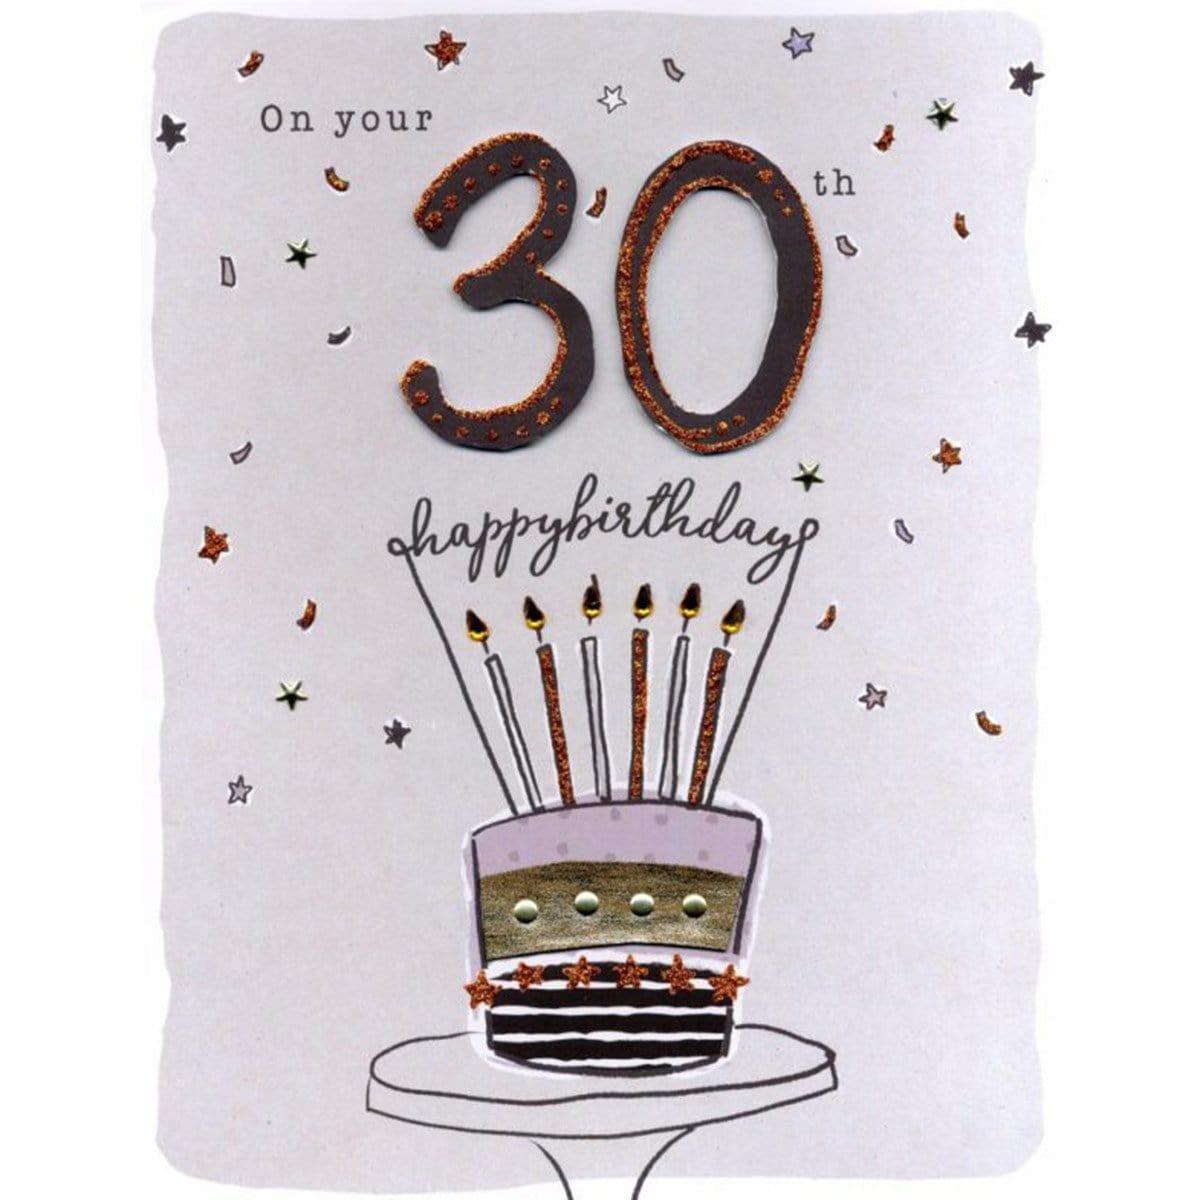 Buy Greeting Cards Gigantic Card, On Your 30Th Birthday sold at Party Expert